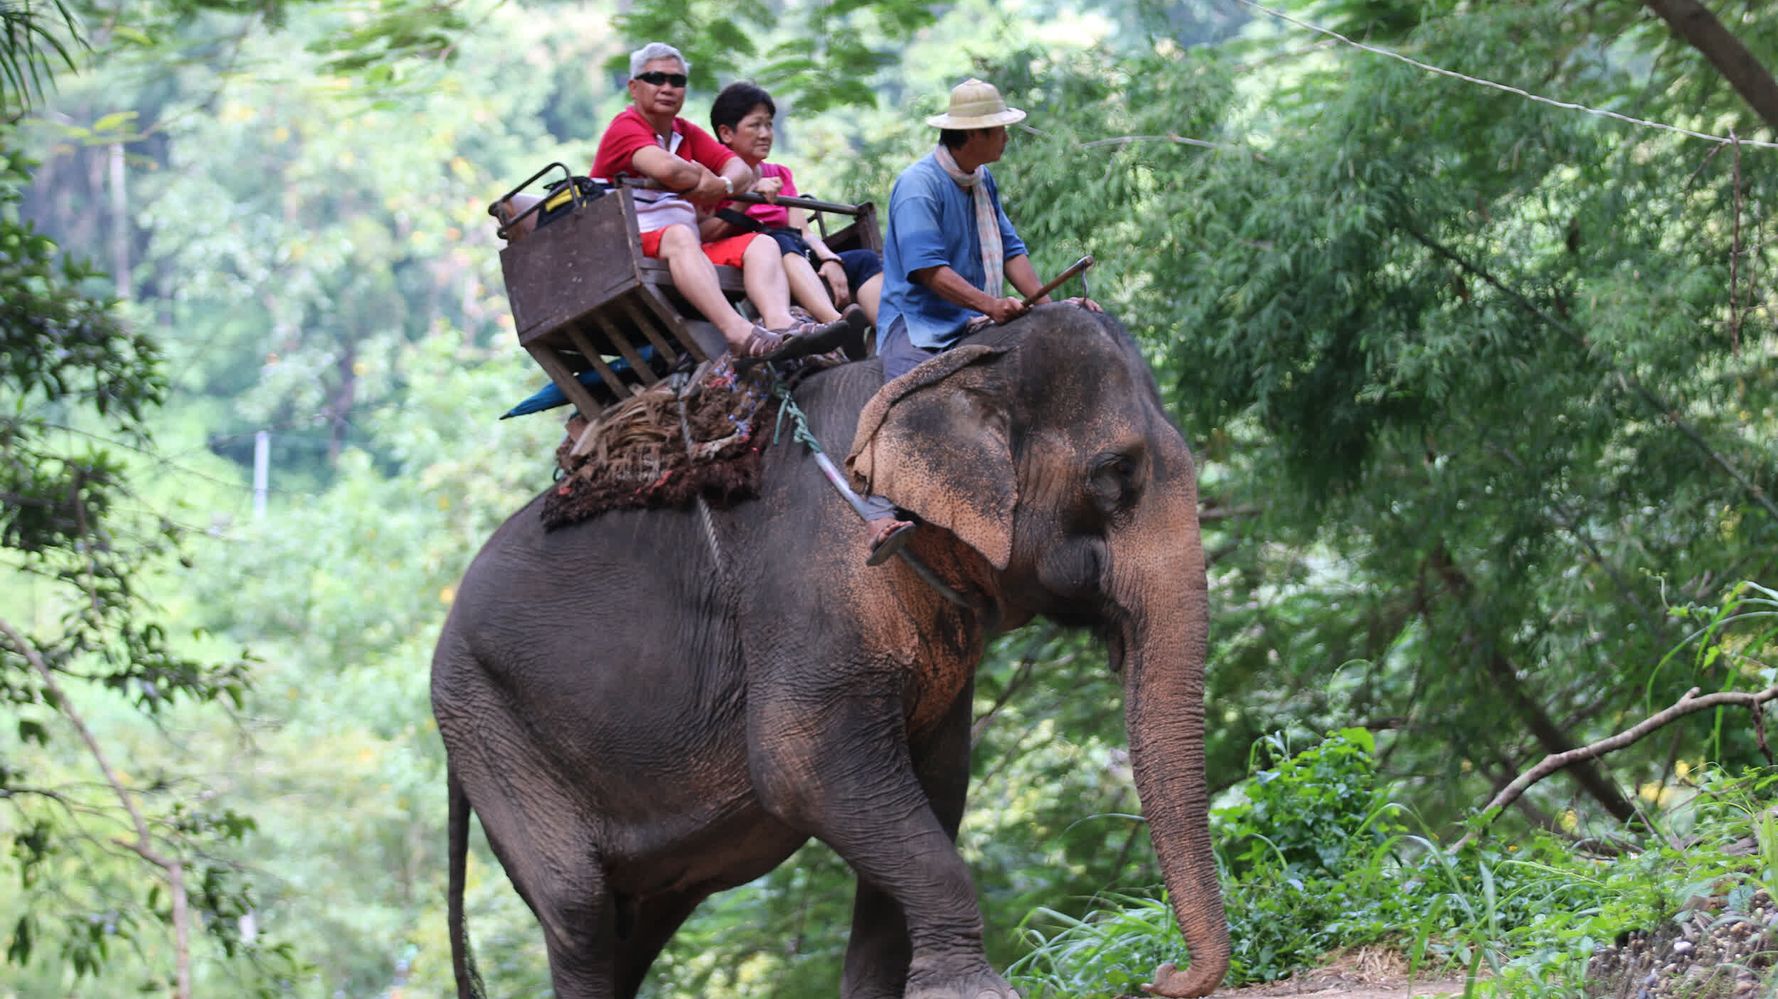 This is what years of tourist rides do to an elephant